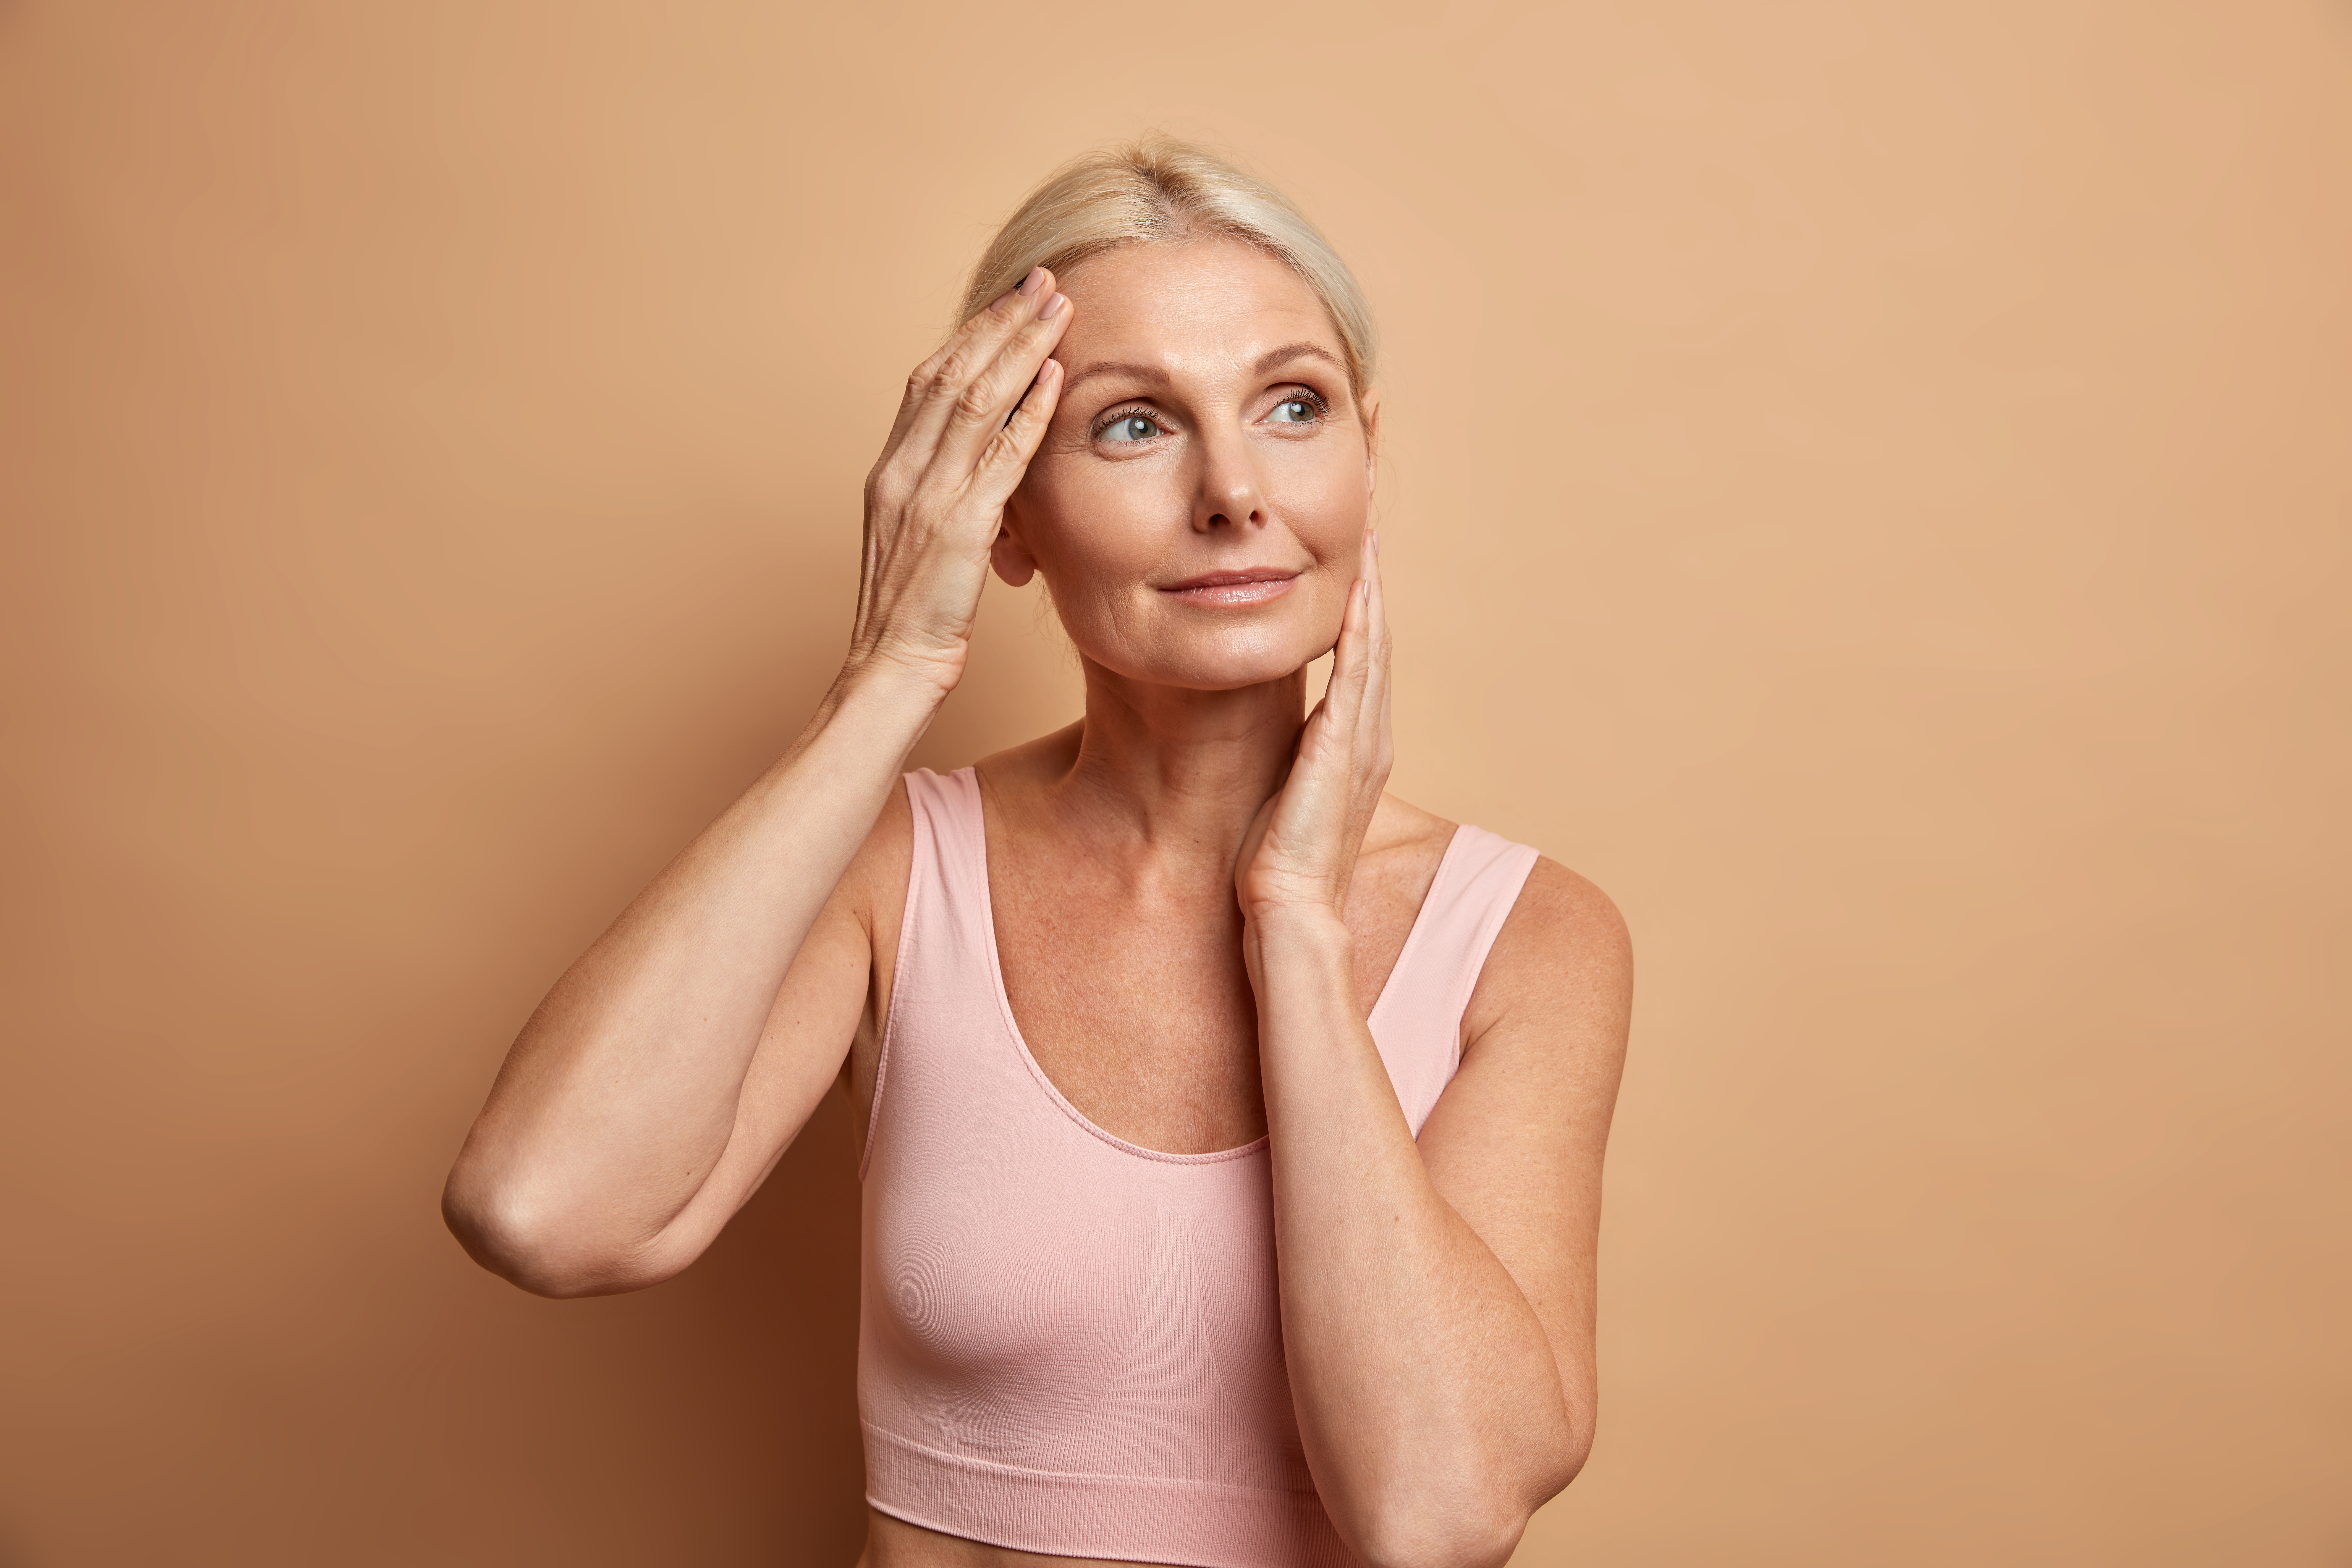 portrait-of-mature-elderly-european-woman-touches-face-gently-has-perfect-skin-and-looks-thoughtfully-away-enjoys-her-soft-complexion-cares-about-appearance-satisfied-after-anti-aging-procedure.jpg